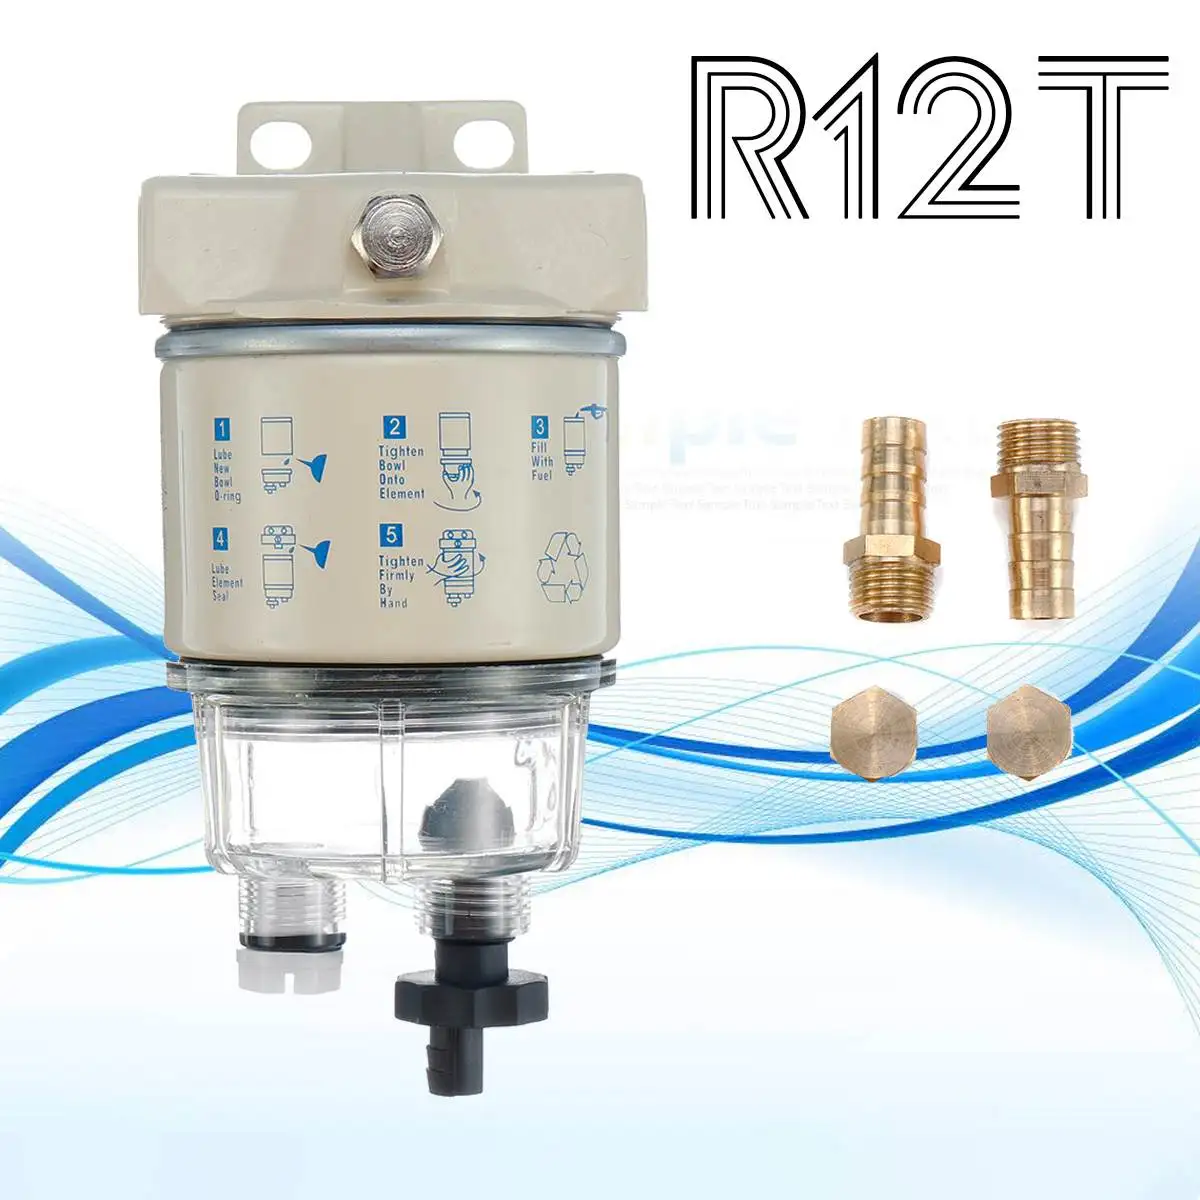 

R12T Fuel/ Water Separator Filter diesel engine for Racor 140R 120AT S3240 NPT ZG1/4-19 Automotive Parts Complete Combo Filter